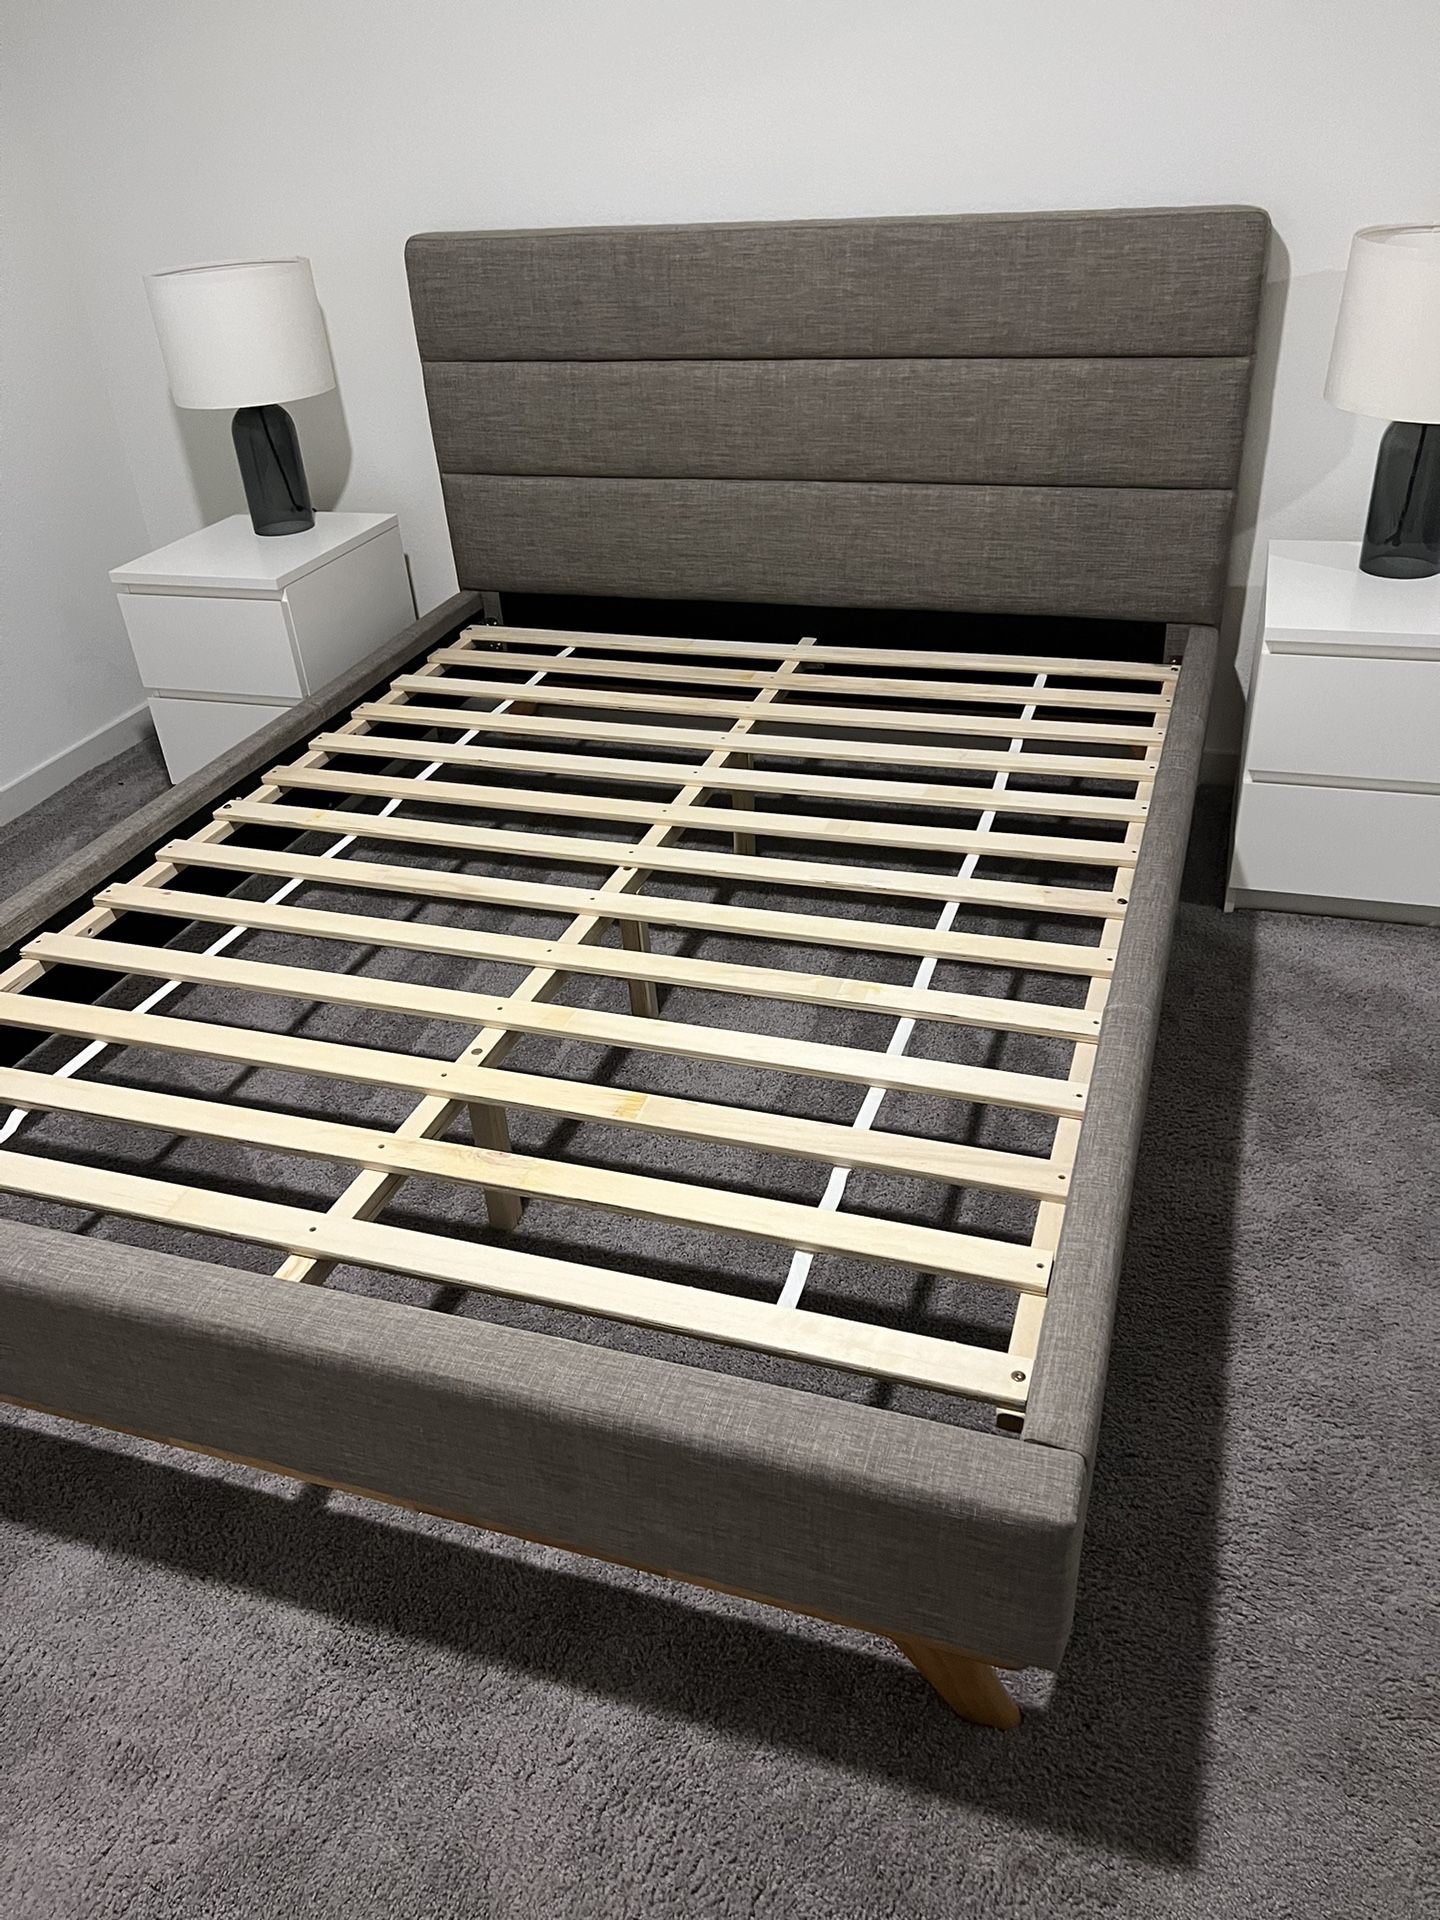 IKEA Queen Bed frame with Headboard and Footboard. Mattress not included. 